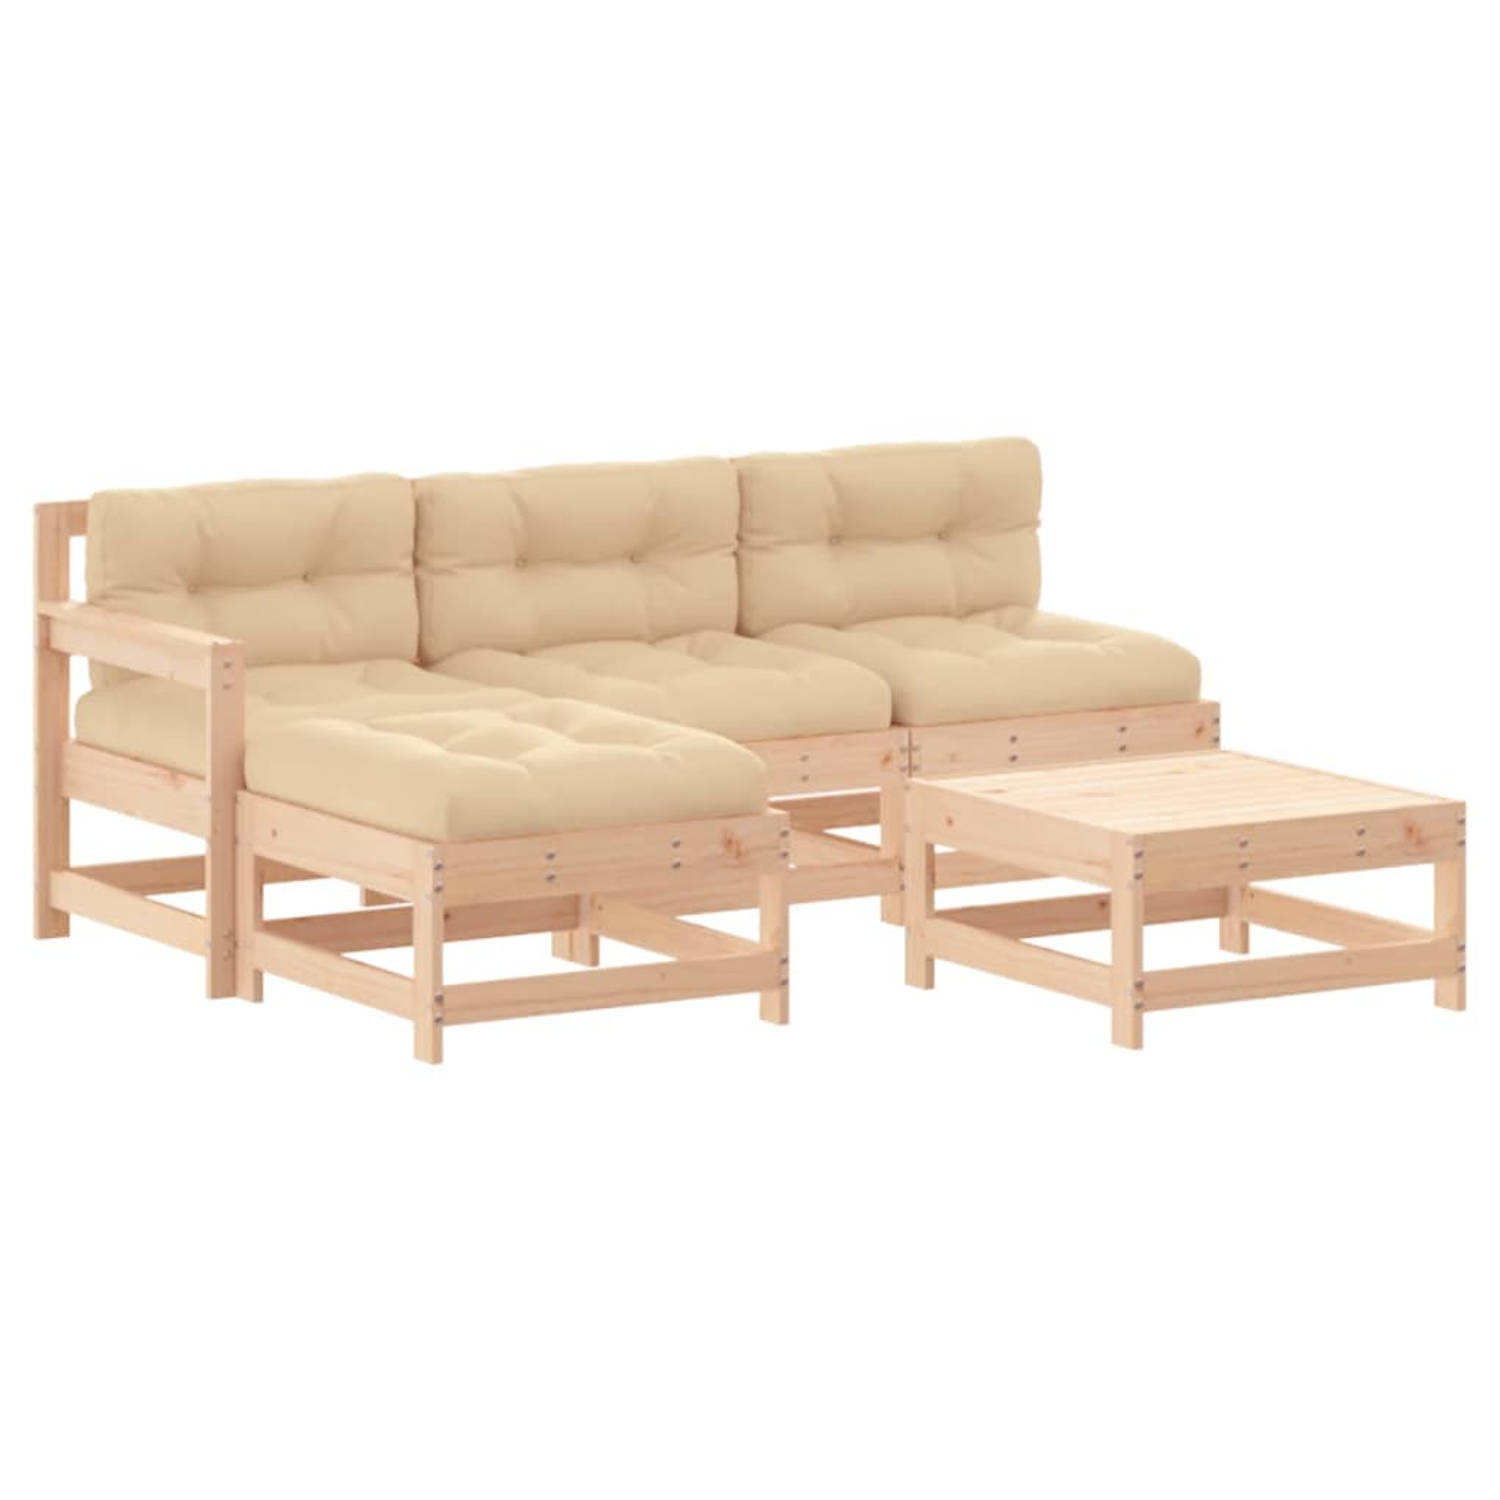 The Living Store Loungeset Tuin - Massief grenenhout - 62x62x70.5 - Beige kussens